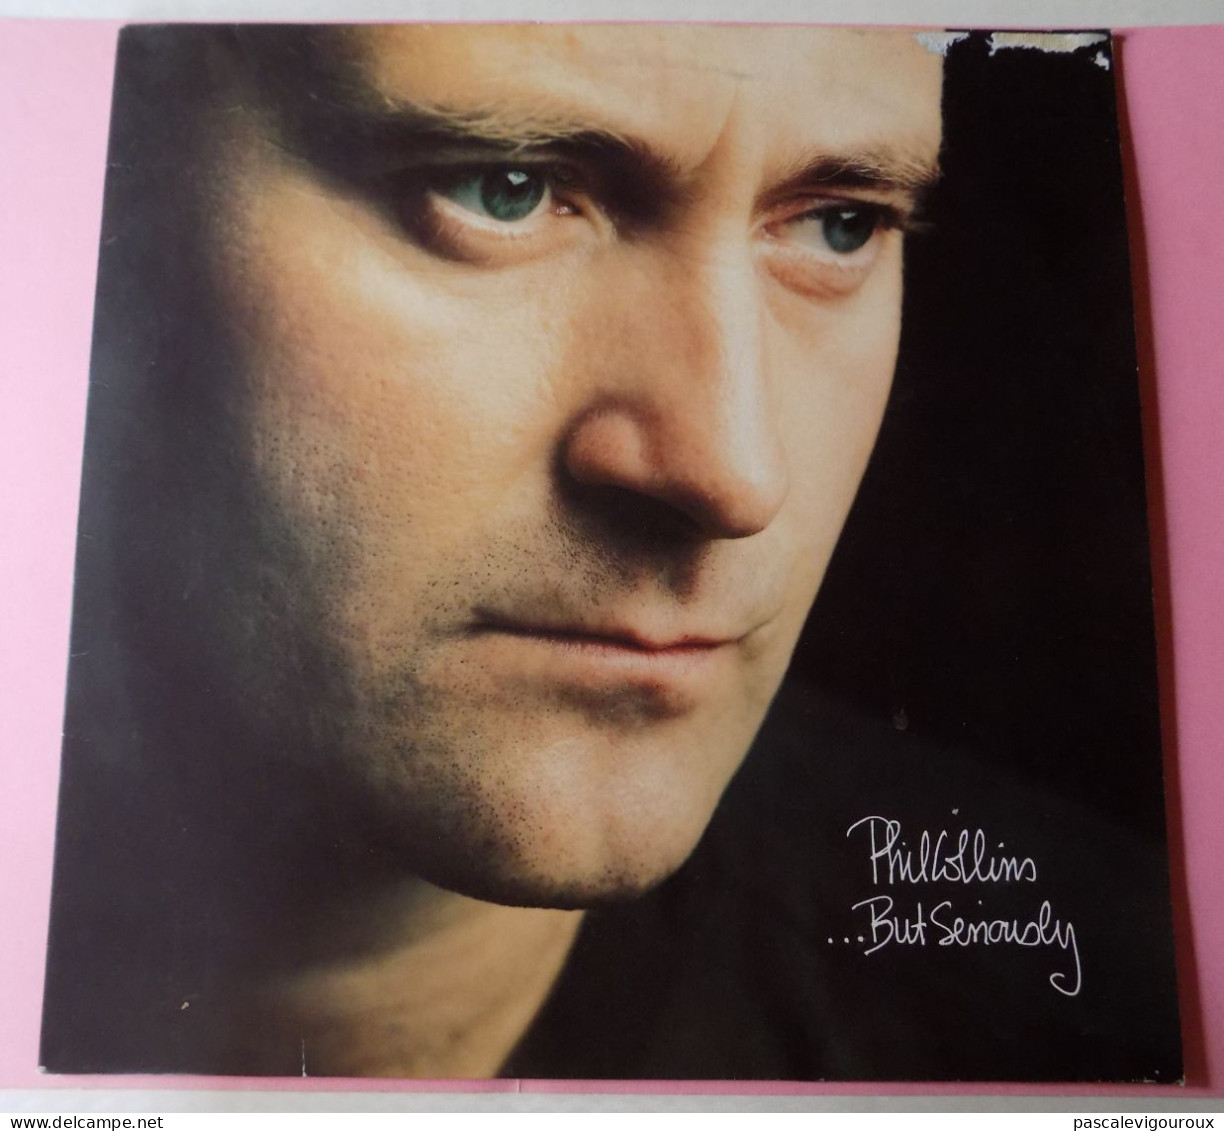 PHIL COLLINS / BUT SERIOUSLY / VINYLE STEREO LP 33T / 1989 / WEA INTERNATIONAL - Sonstige - Englische Musik